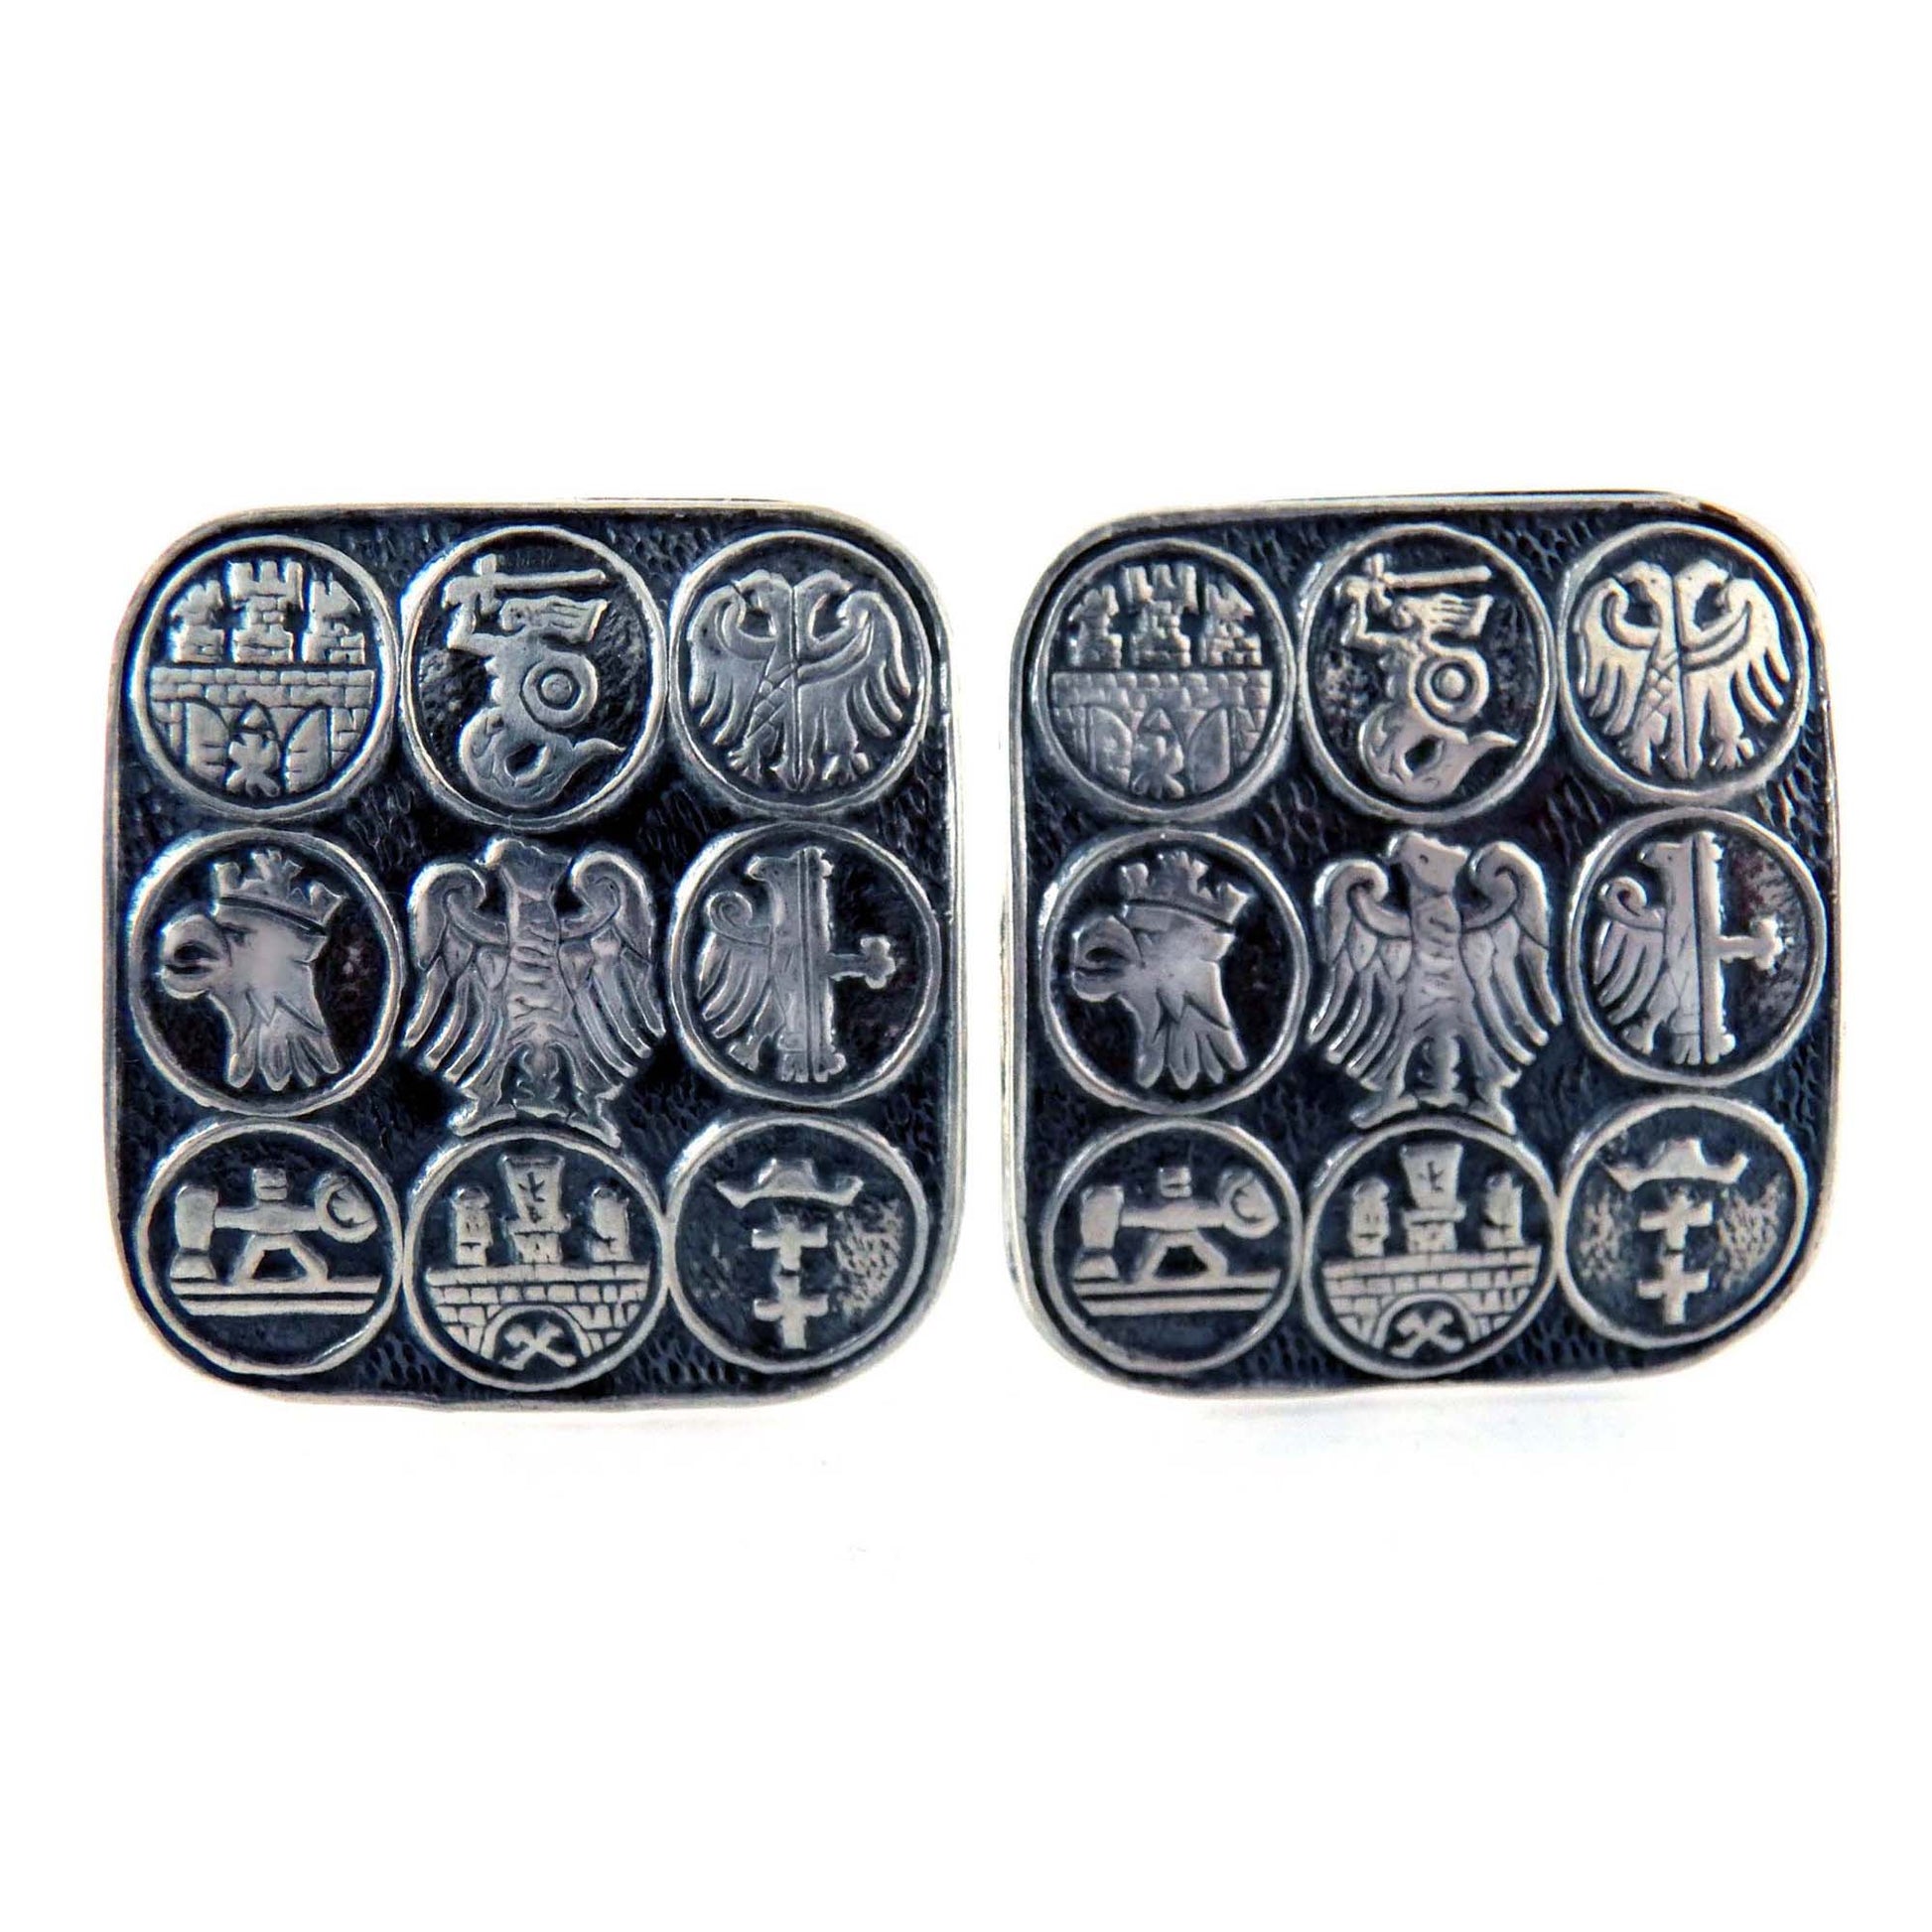 Polish towns coat of arms cufflinks.